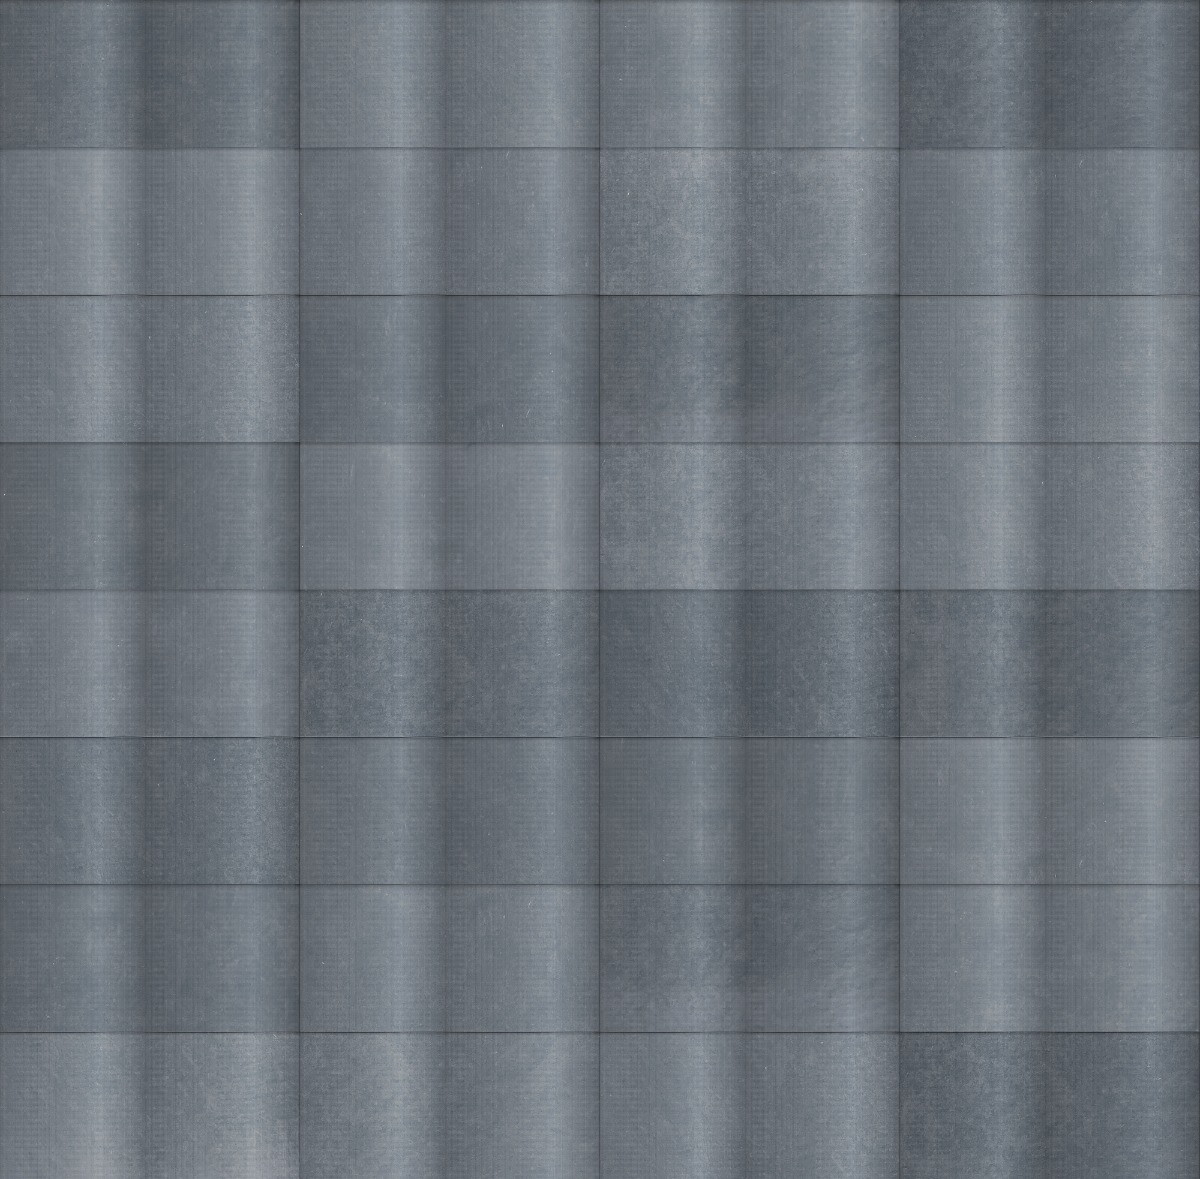 A seamless tile texture with fibre cement slate tiles arranged in a Stack pattern